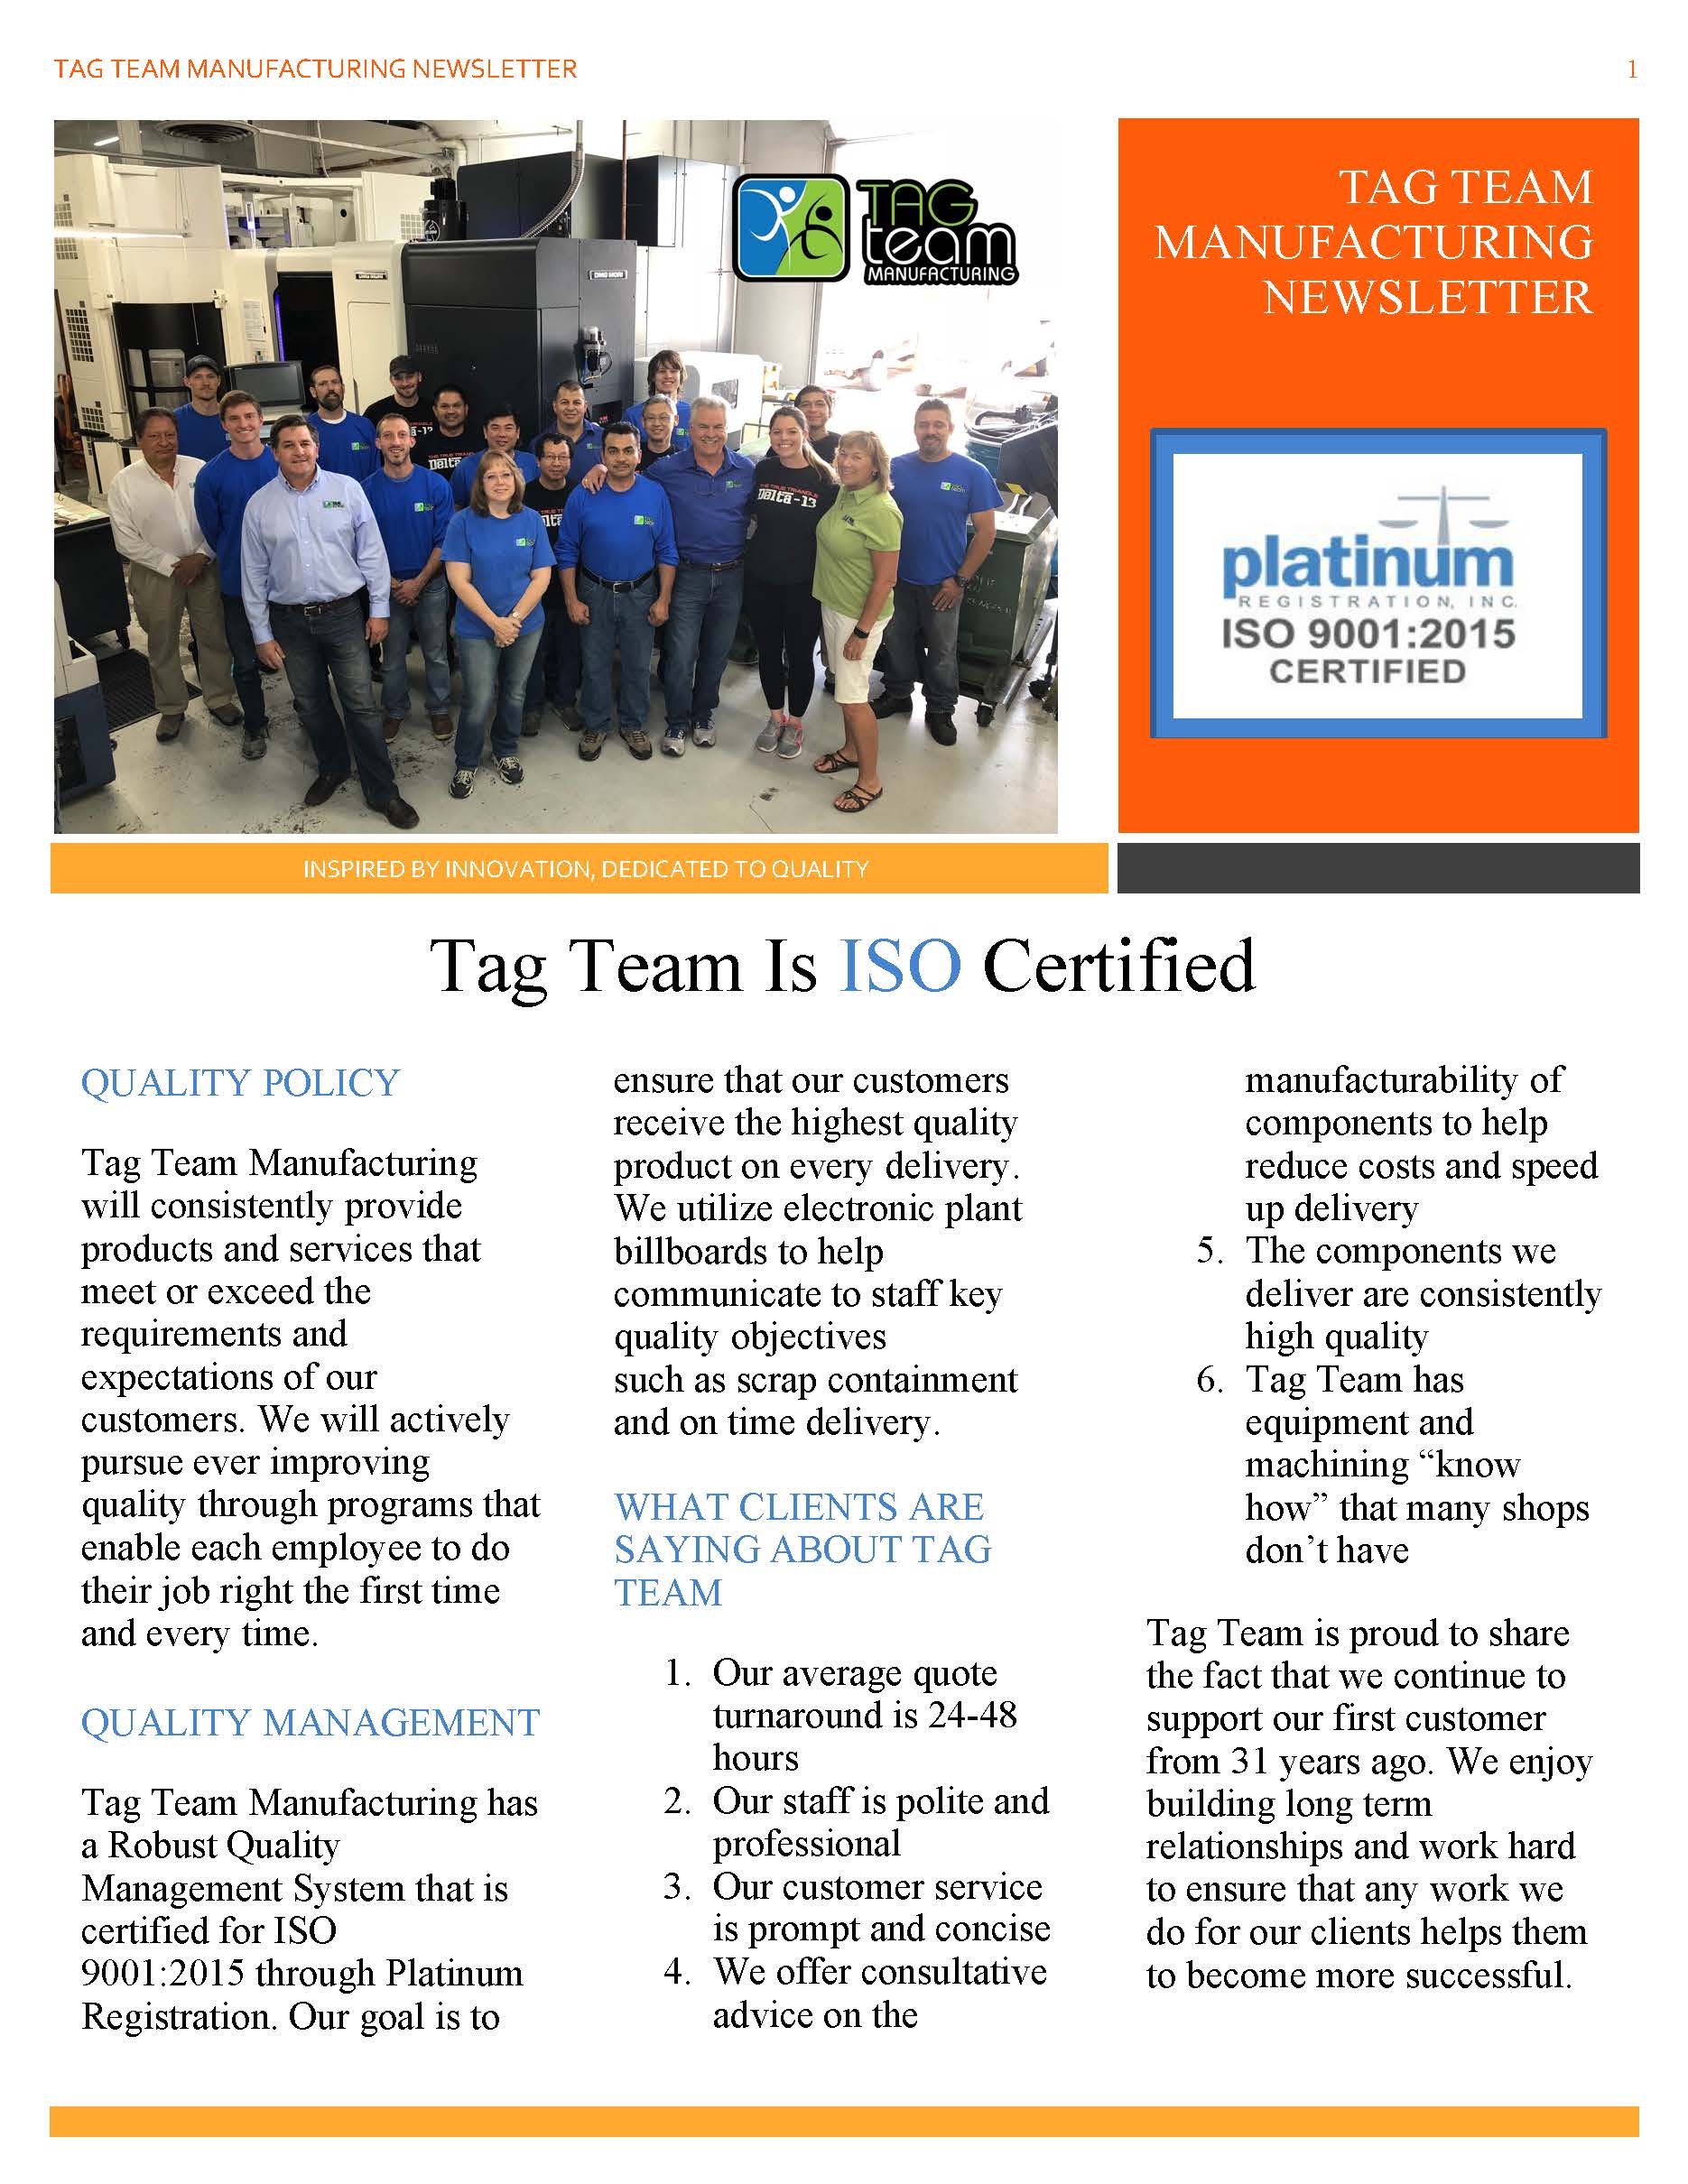 Tag Team Manufacturing Newsletter